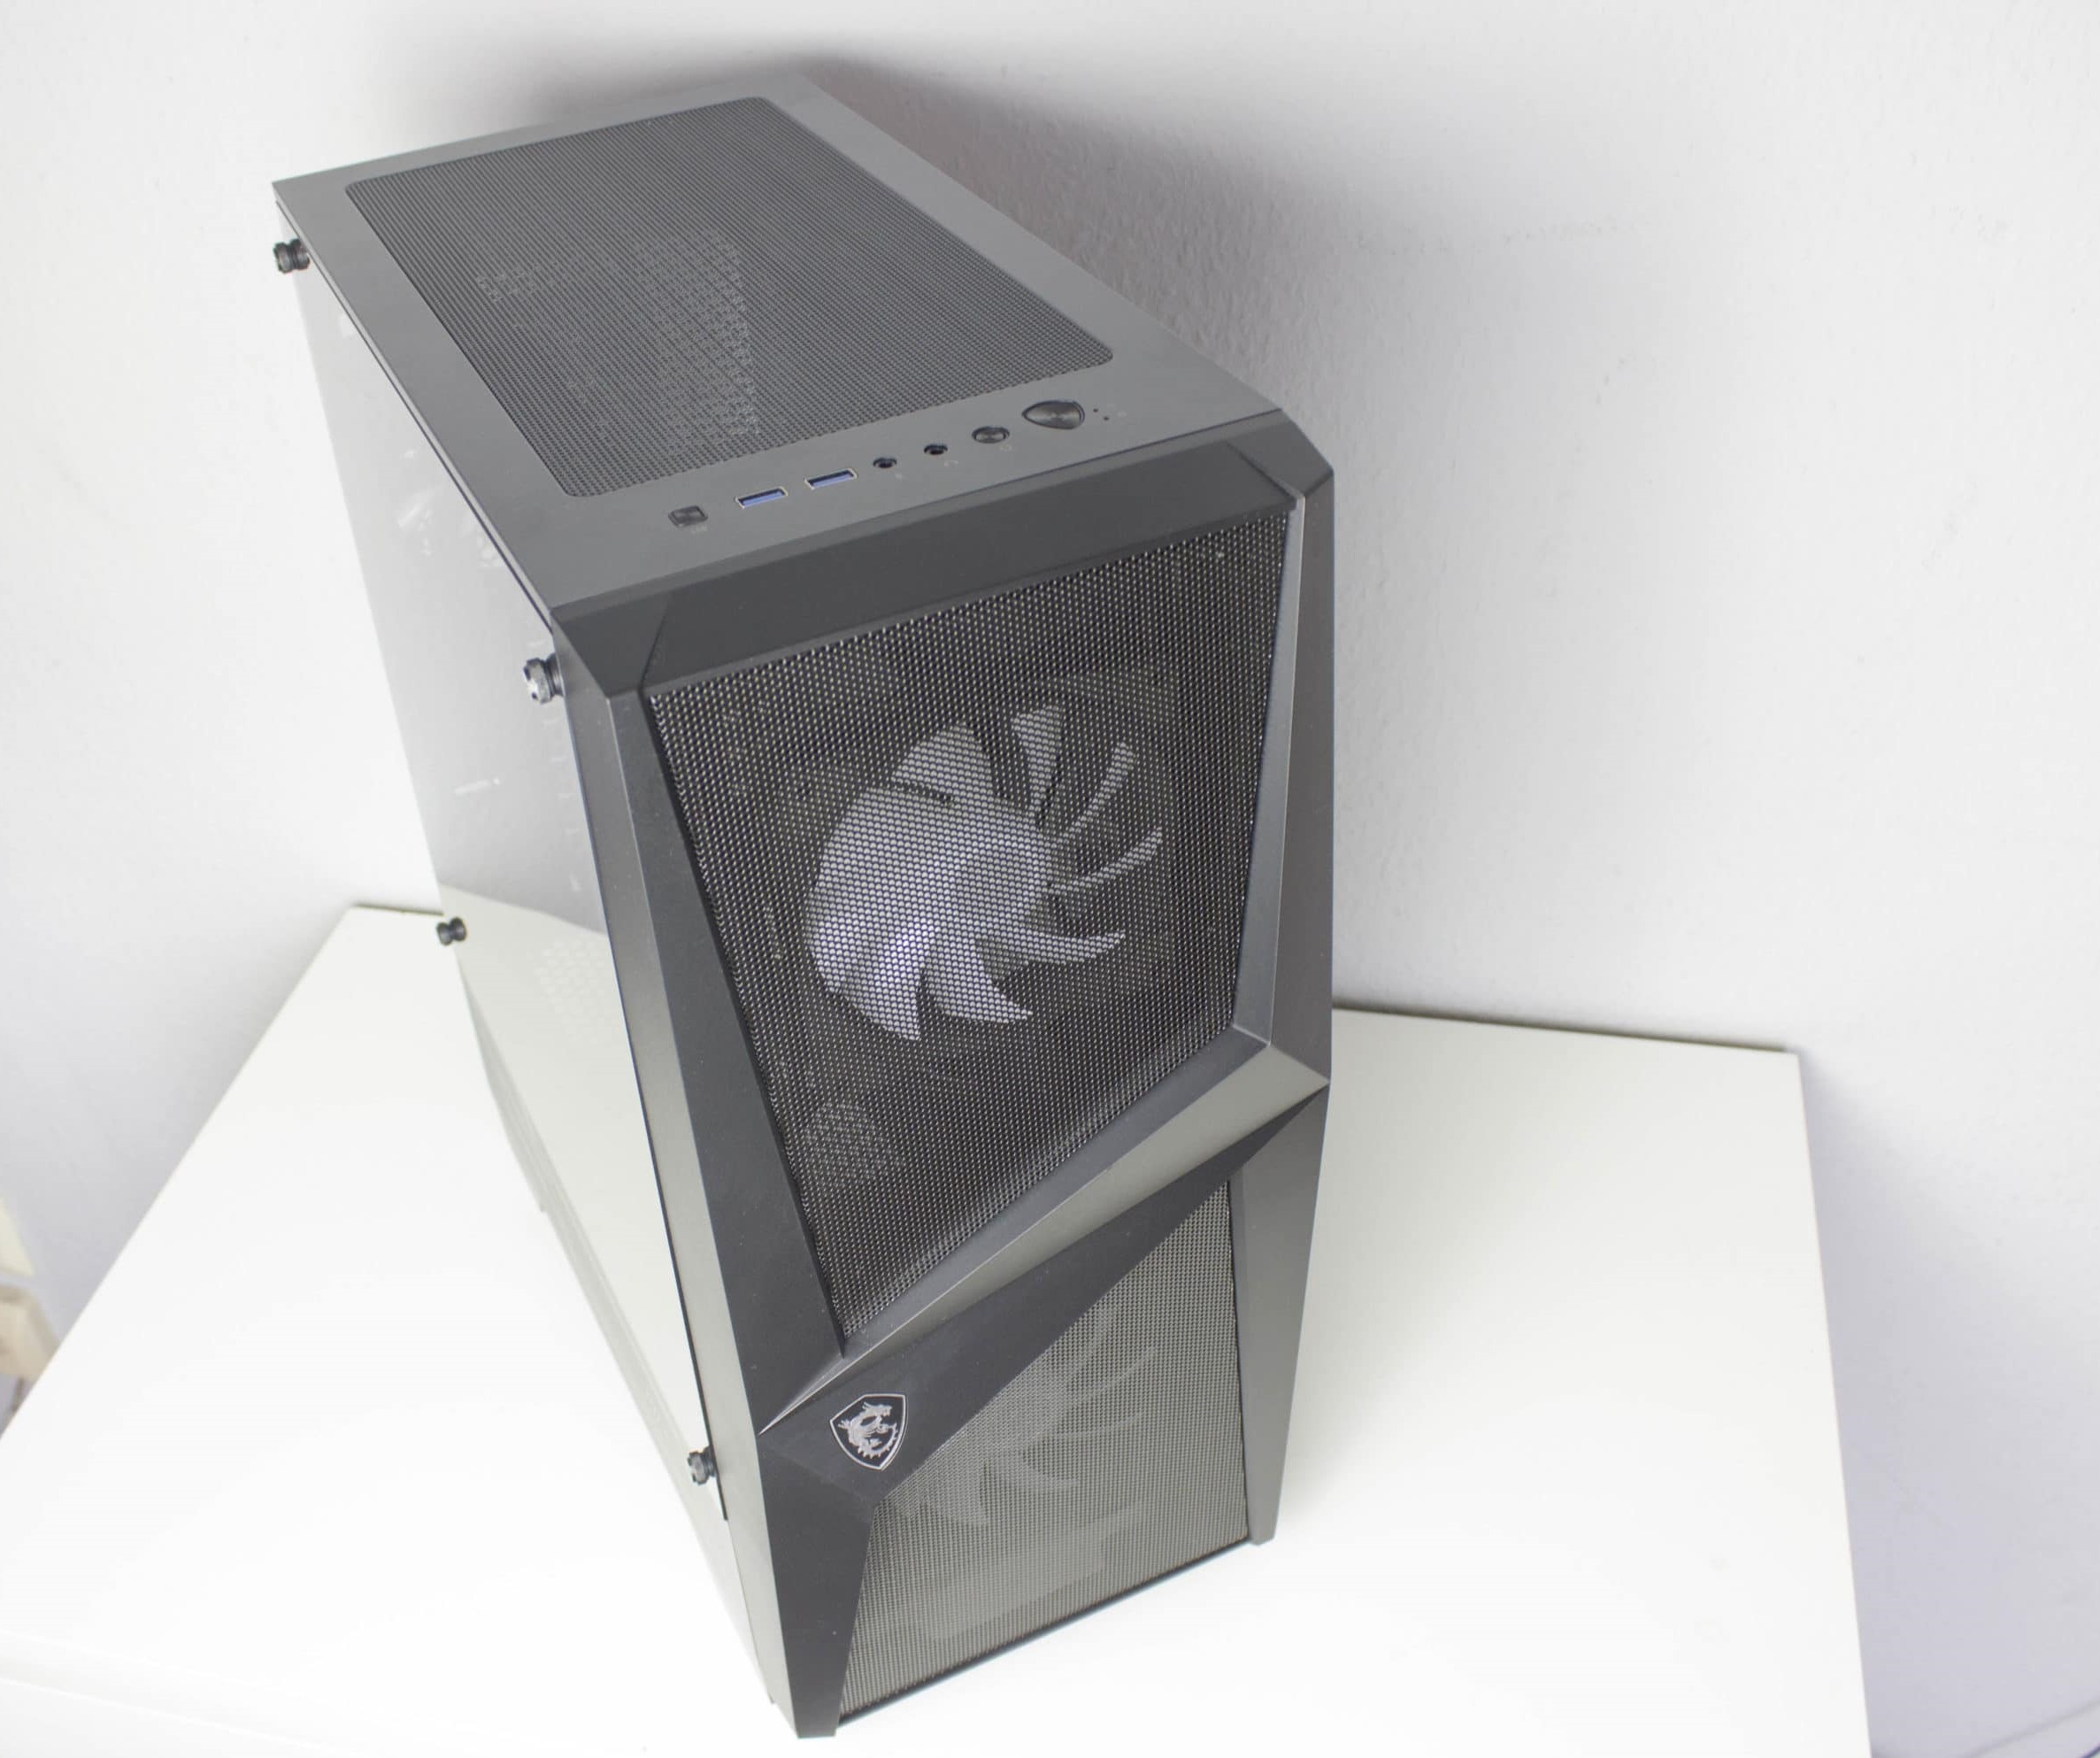 MSI MAG FORGE 100R - PC Case